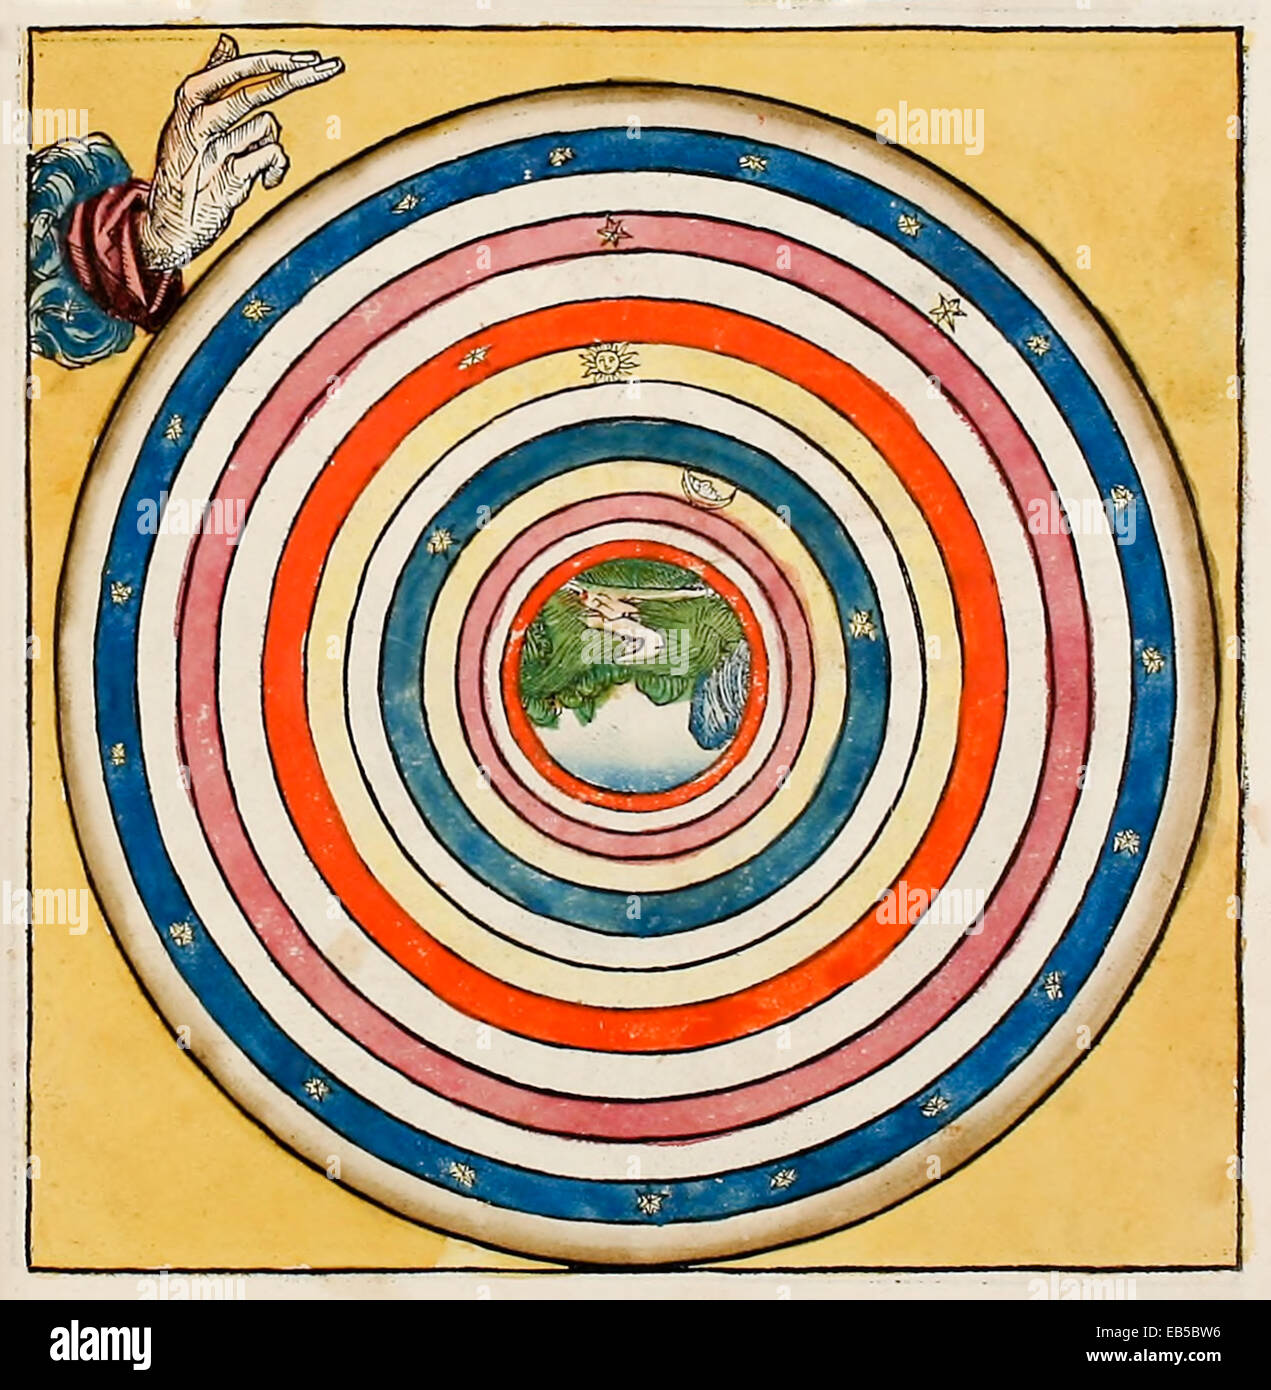 Creation, the 4th day, God creates all the stars and heavenly bodies. From 'Nuremberg Chronicle' or 'Liber Chronicarum' by Hartmann Schedel (1440-1514). See description for more information. Stock Photo